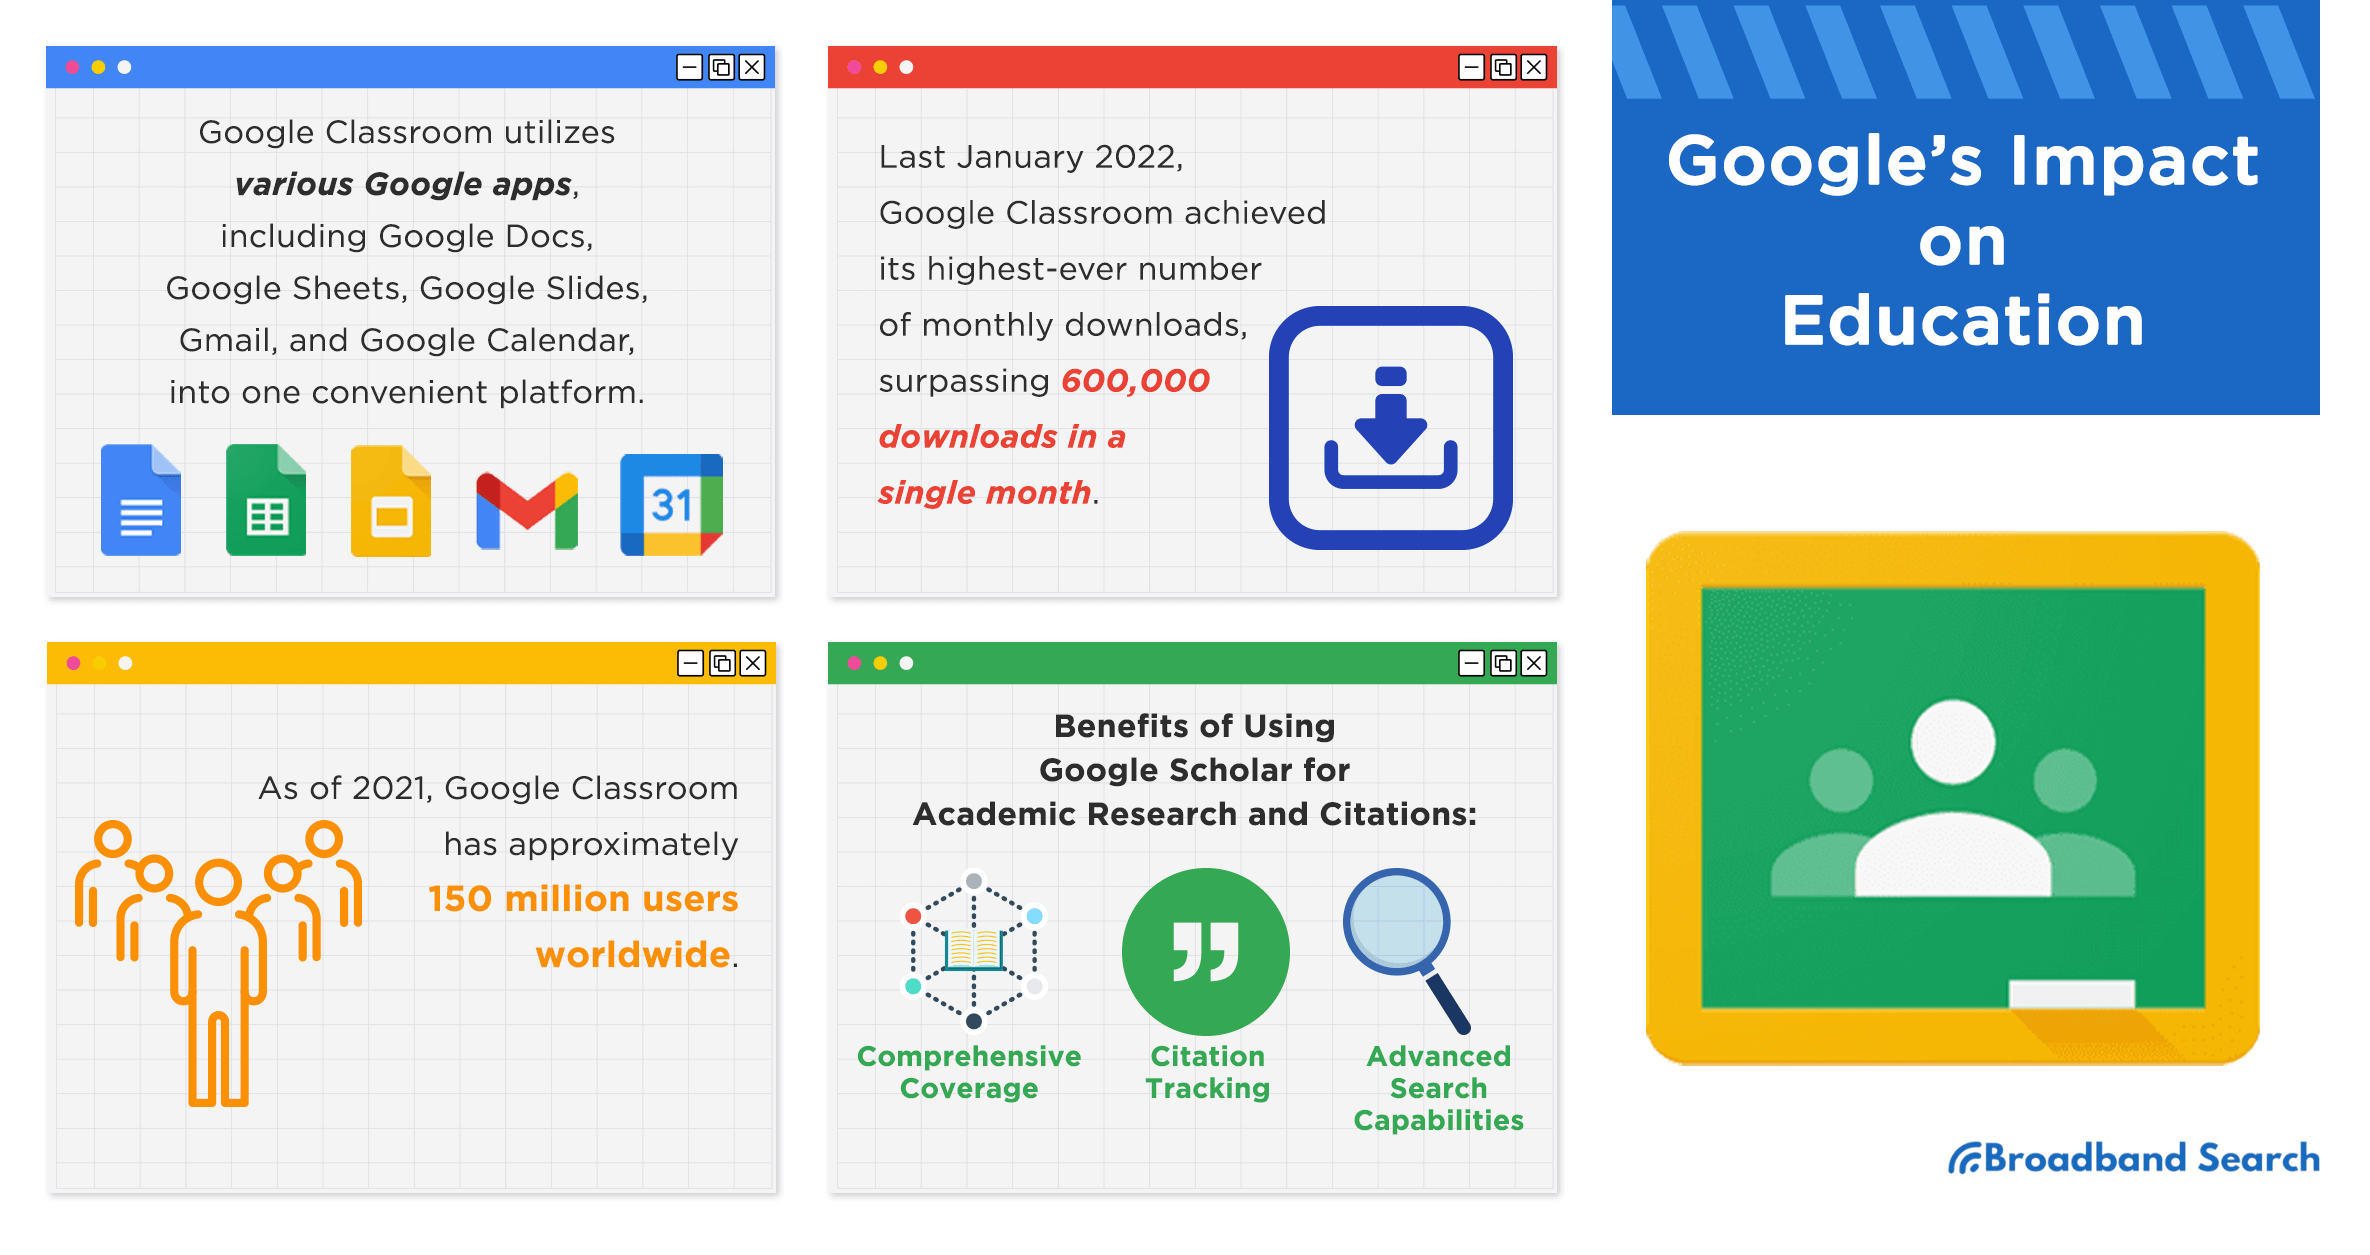 Google's impact on education infographic